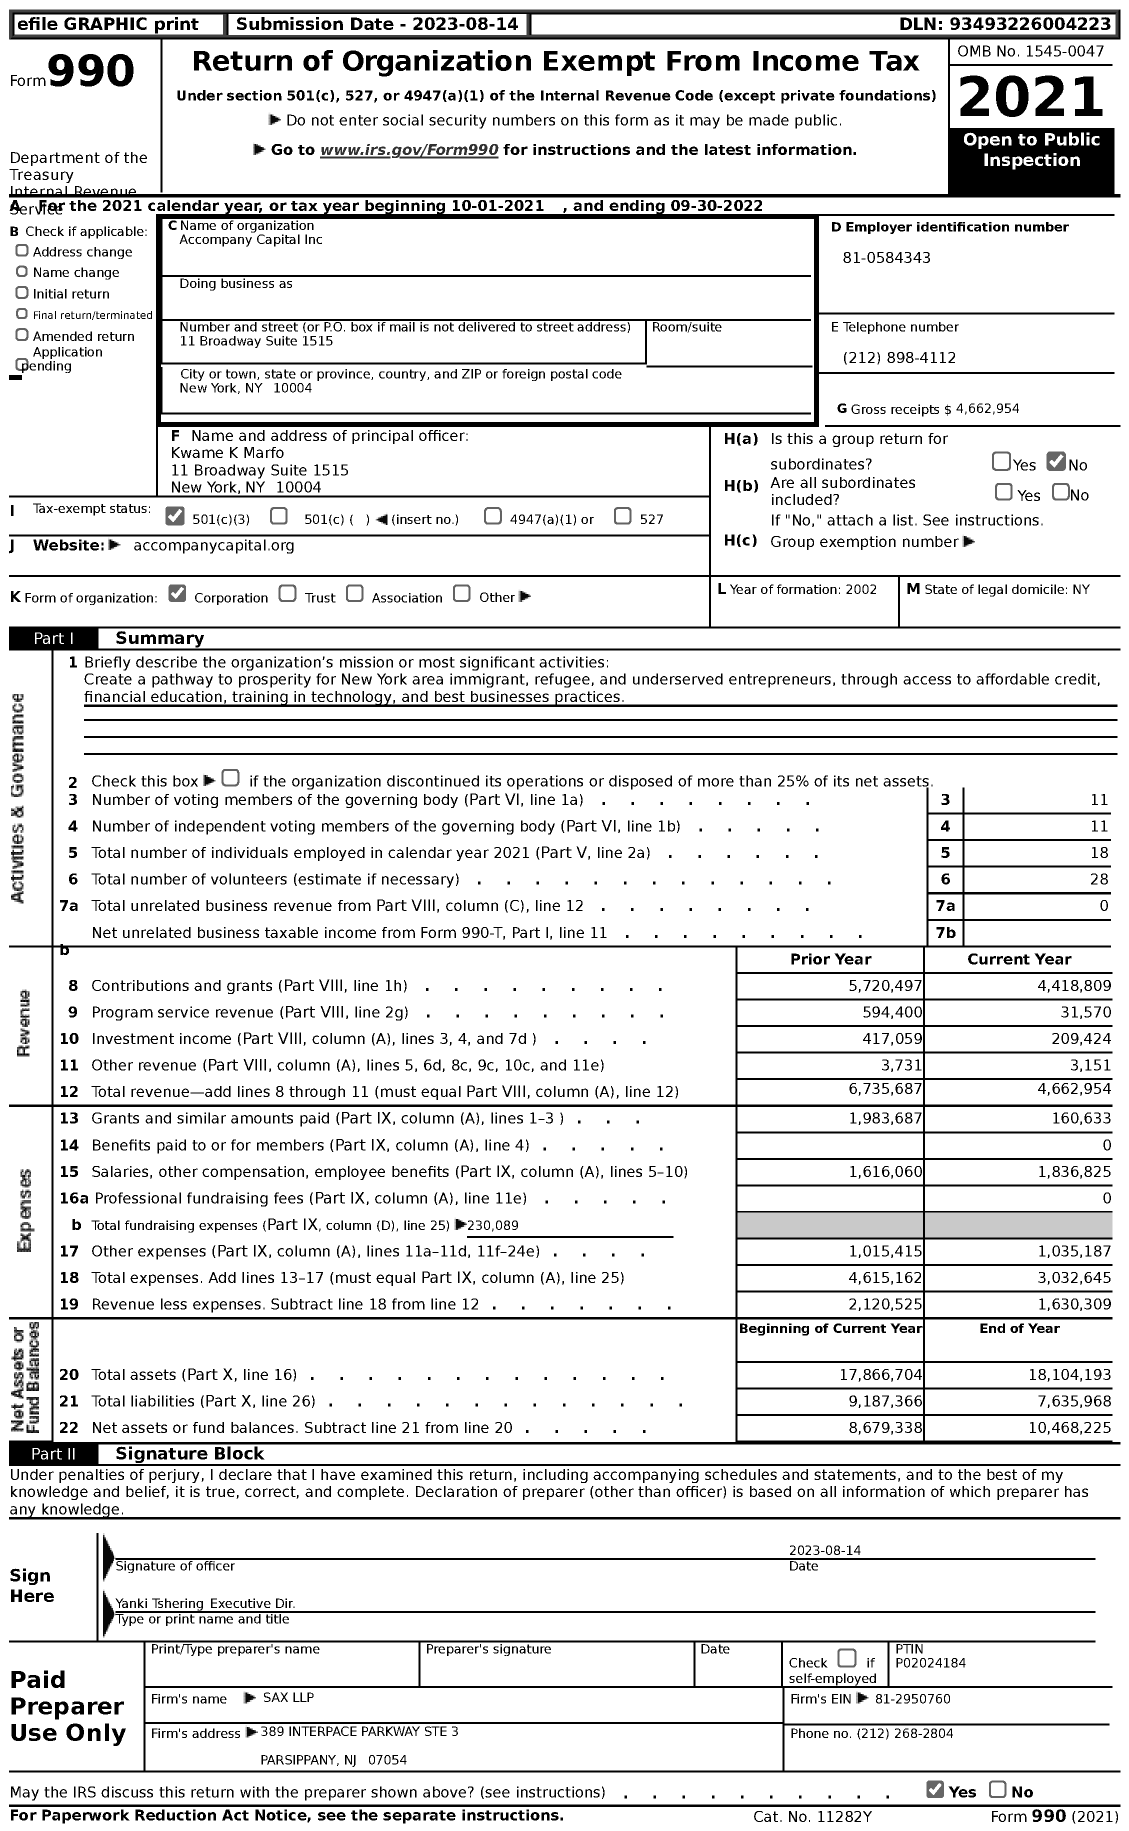 Image of first page of 2021 Form 990 for Accompany Capital